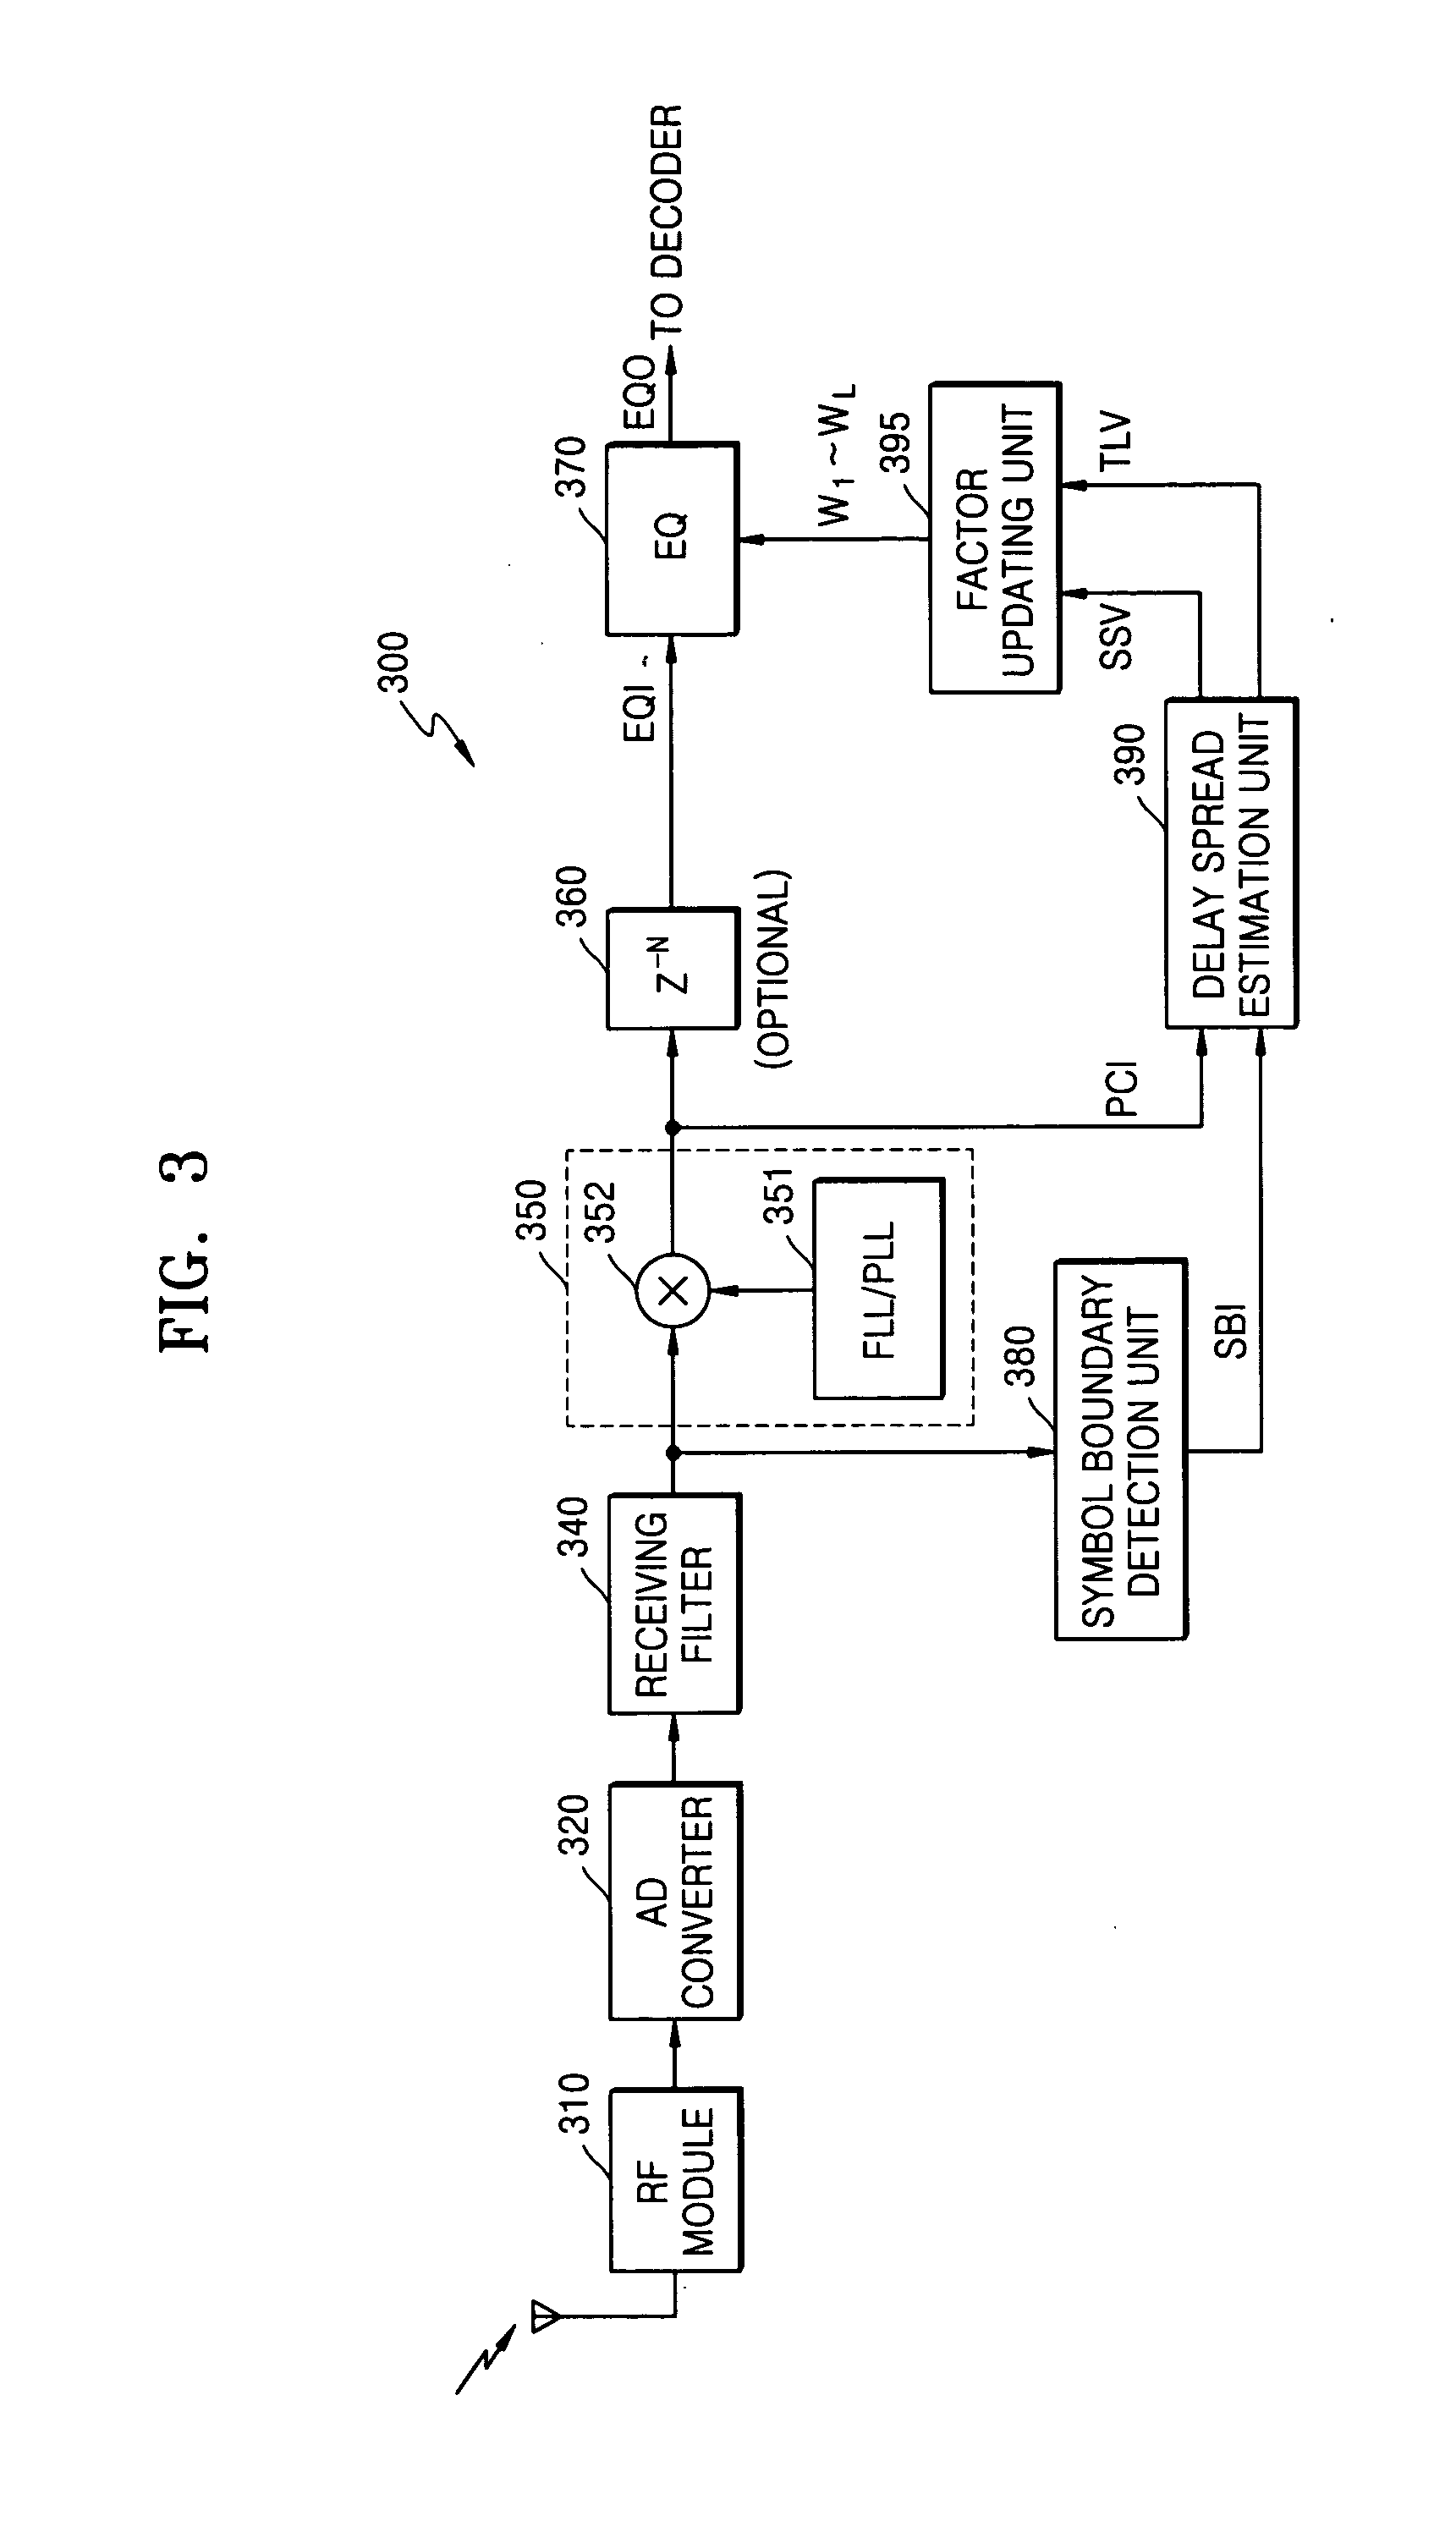 Wired/wireless communication receiver and method for improving performance of equalizer through multipath delay spread estimation